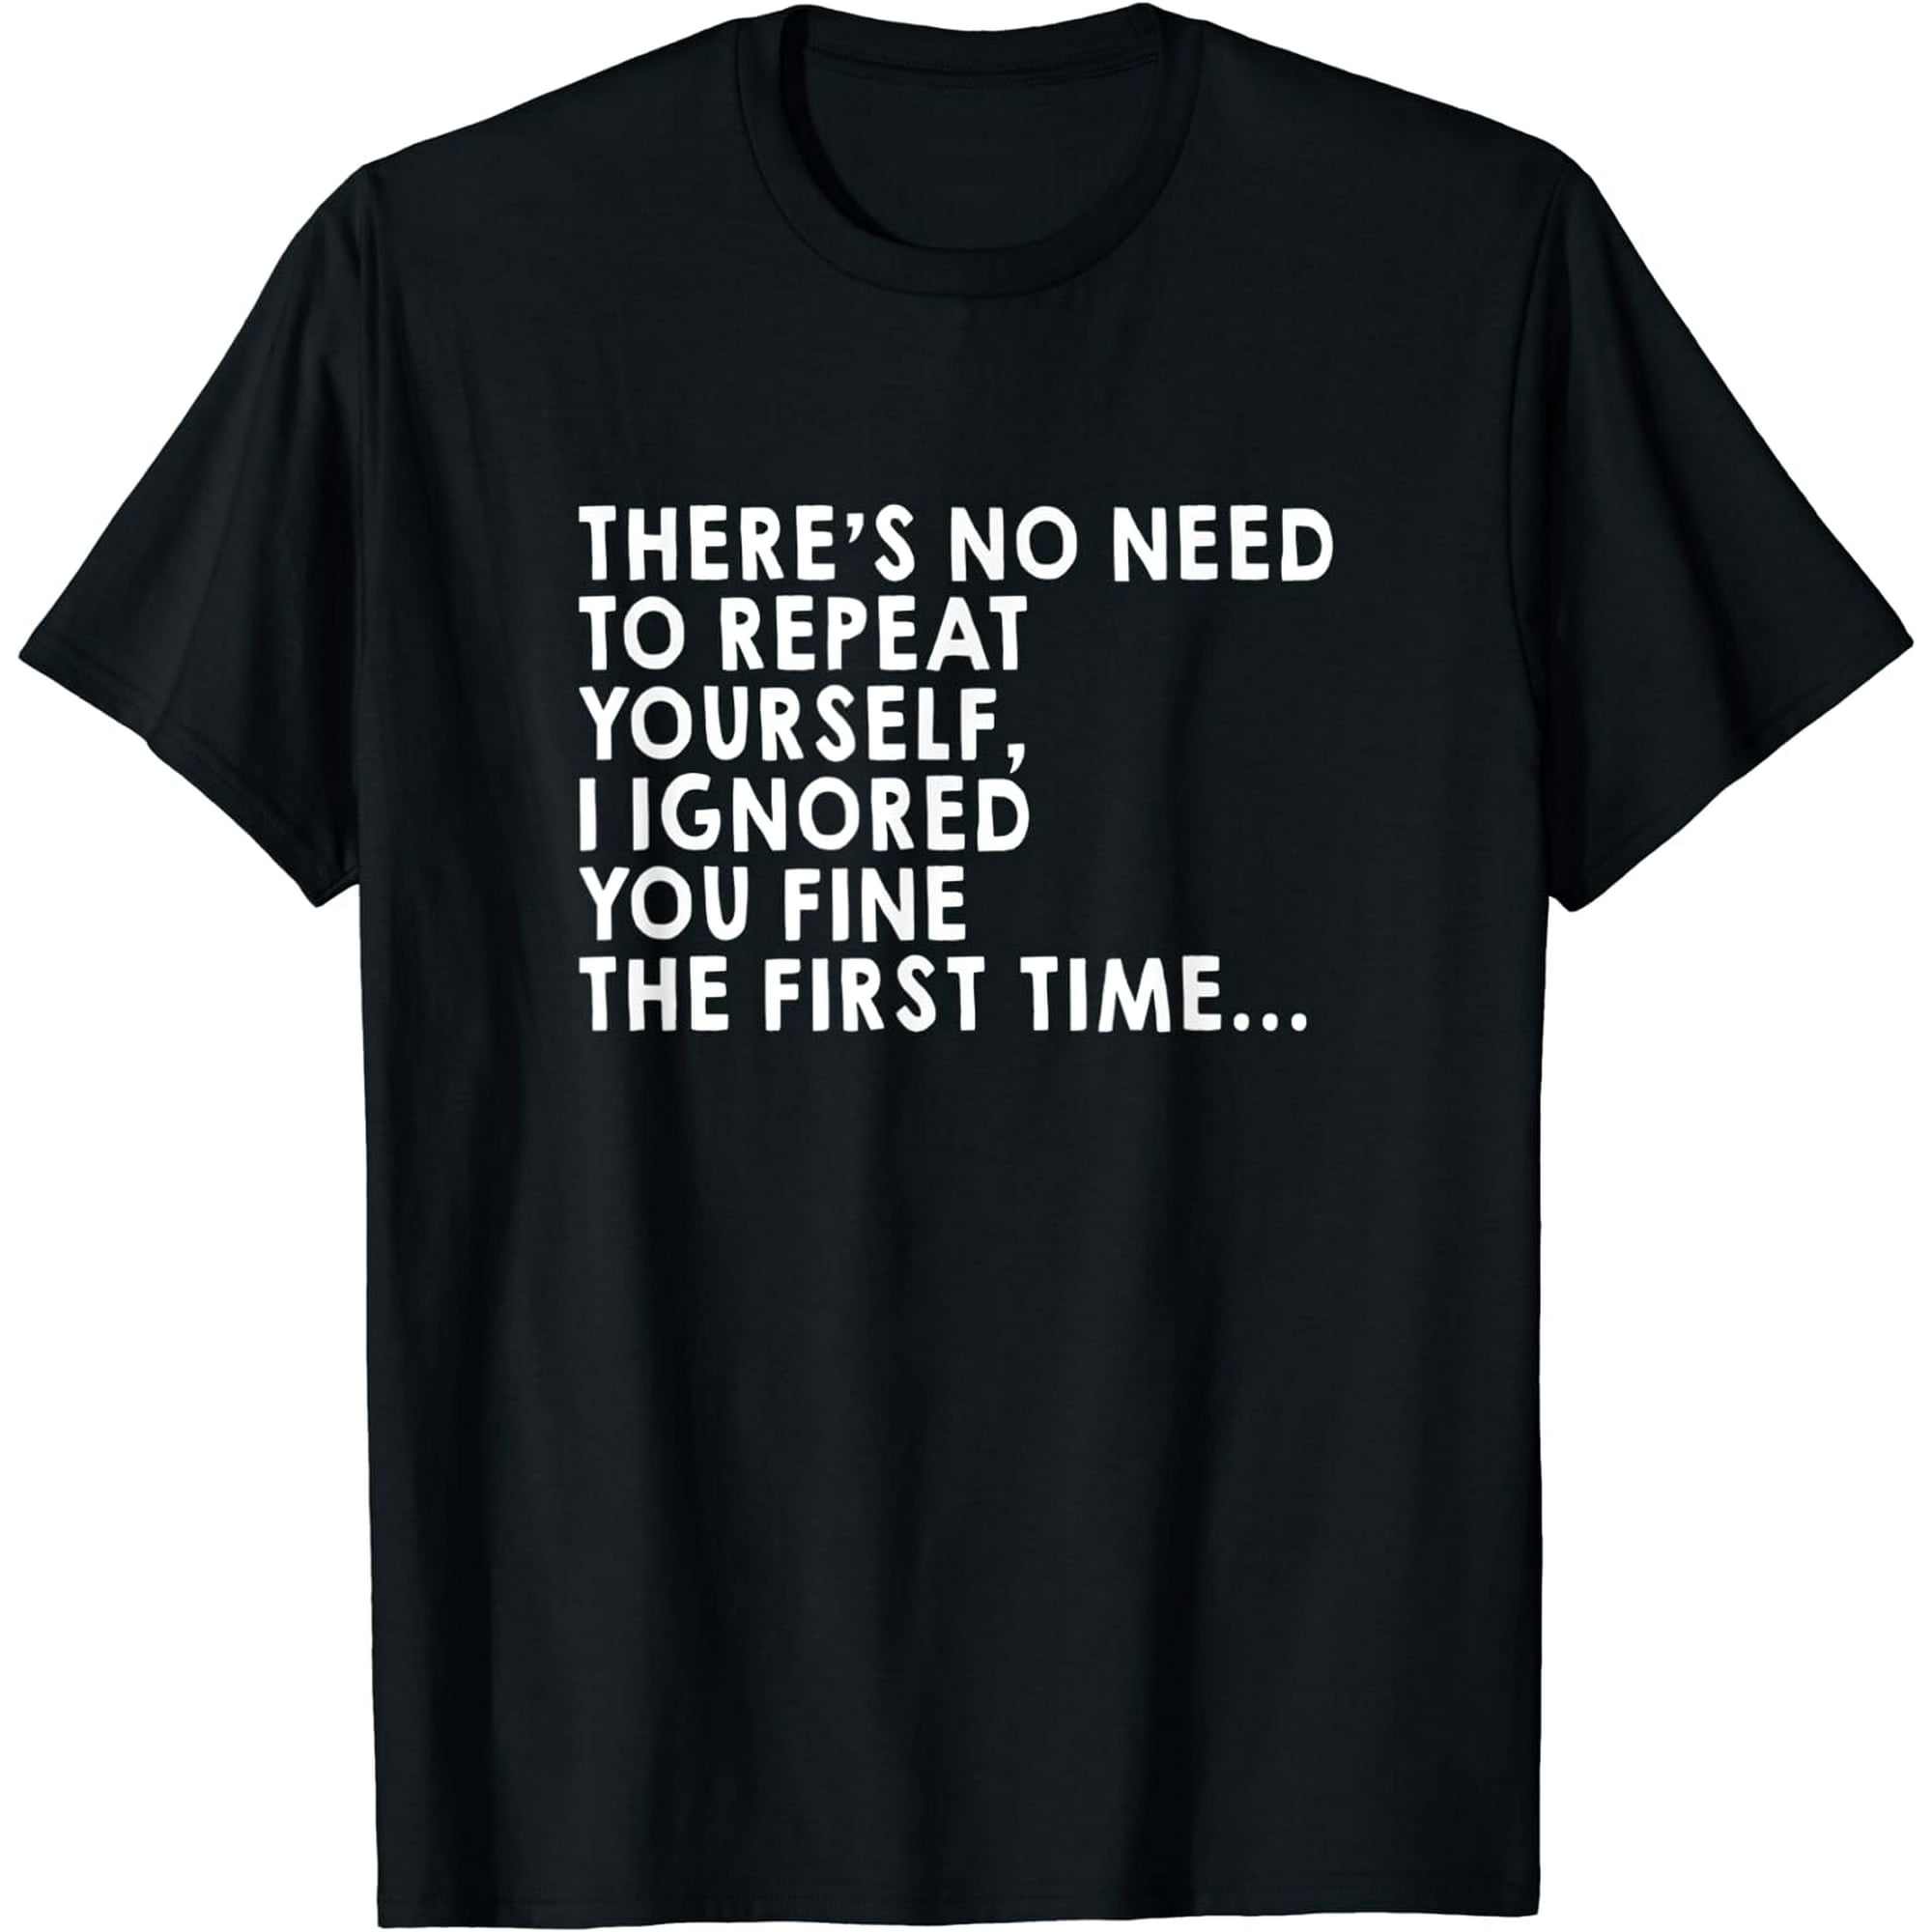 There's No Need To Repeat Yourself Sarcastic Humor Short Sleeve Mens ...